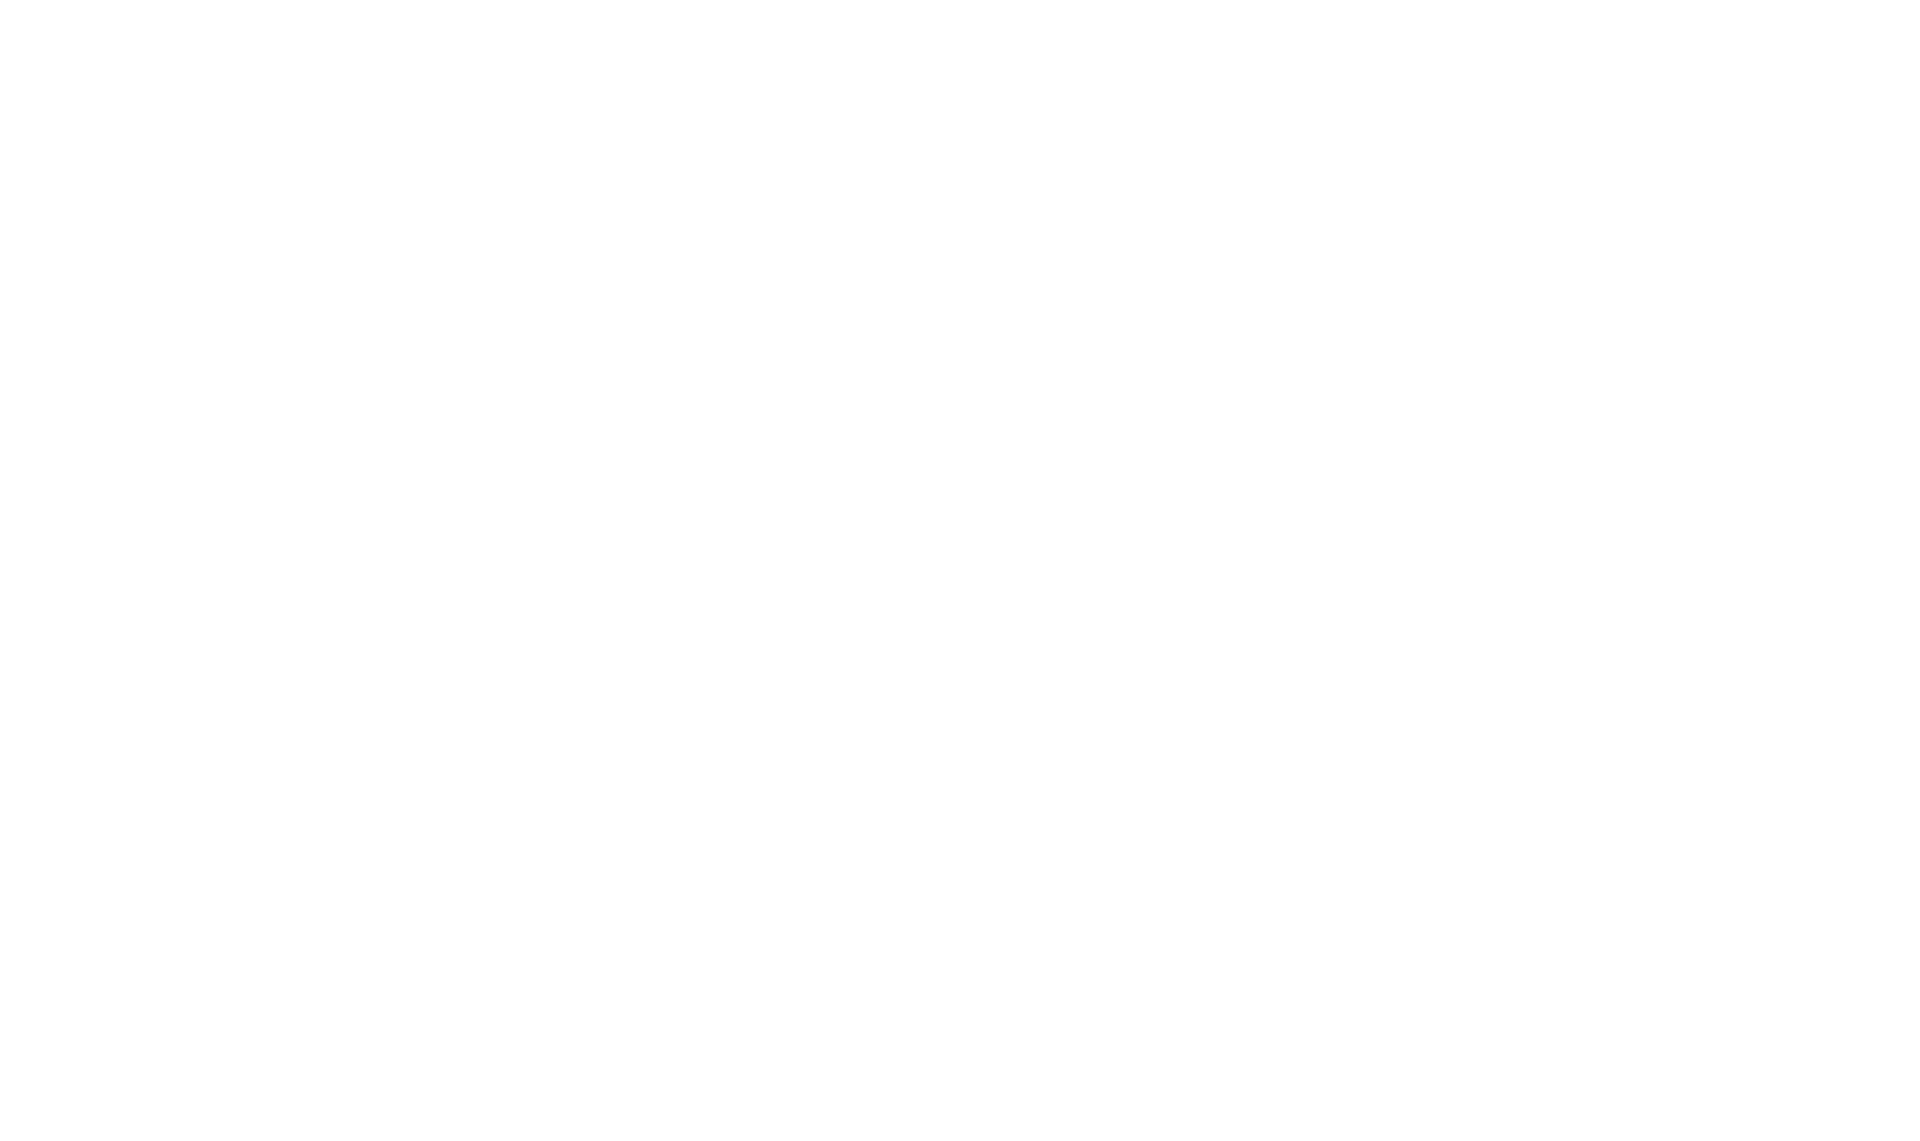 Embers Center on 24th